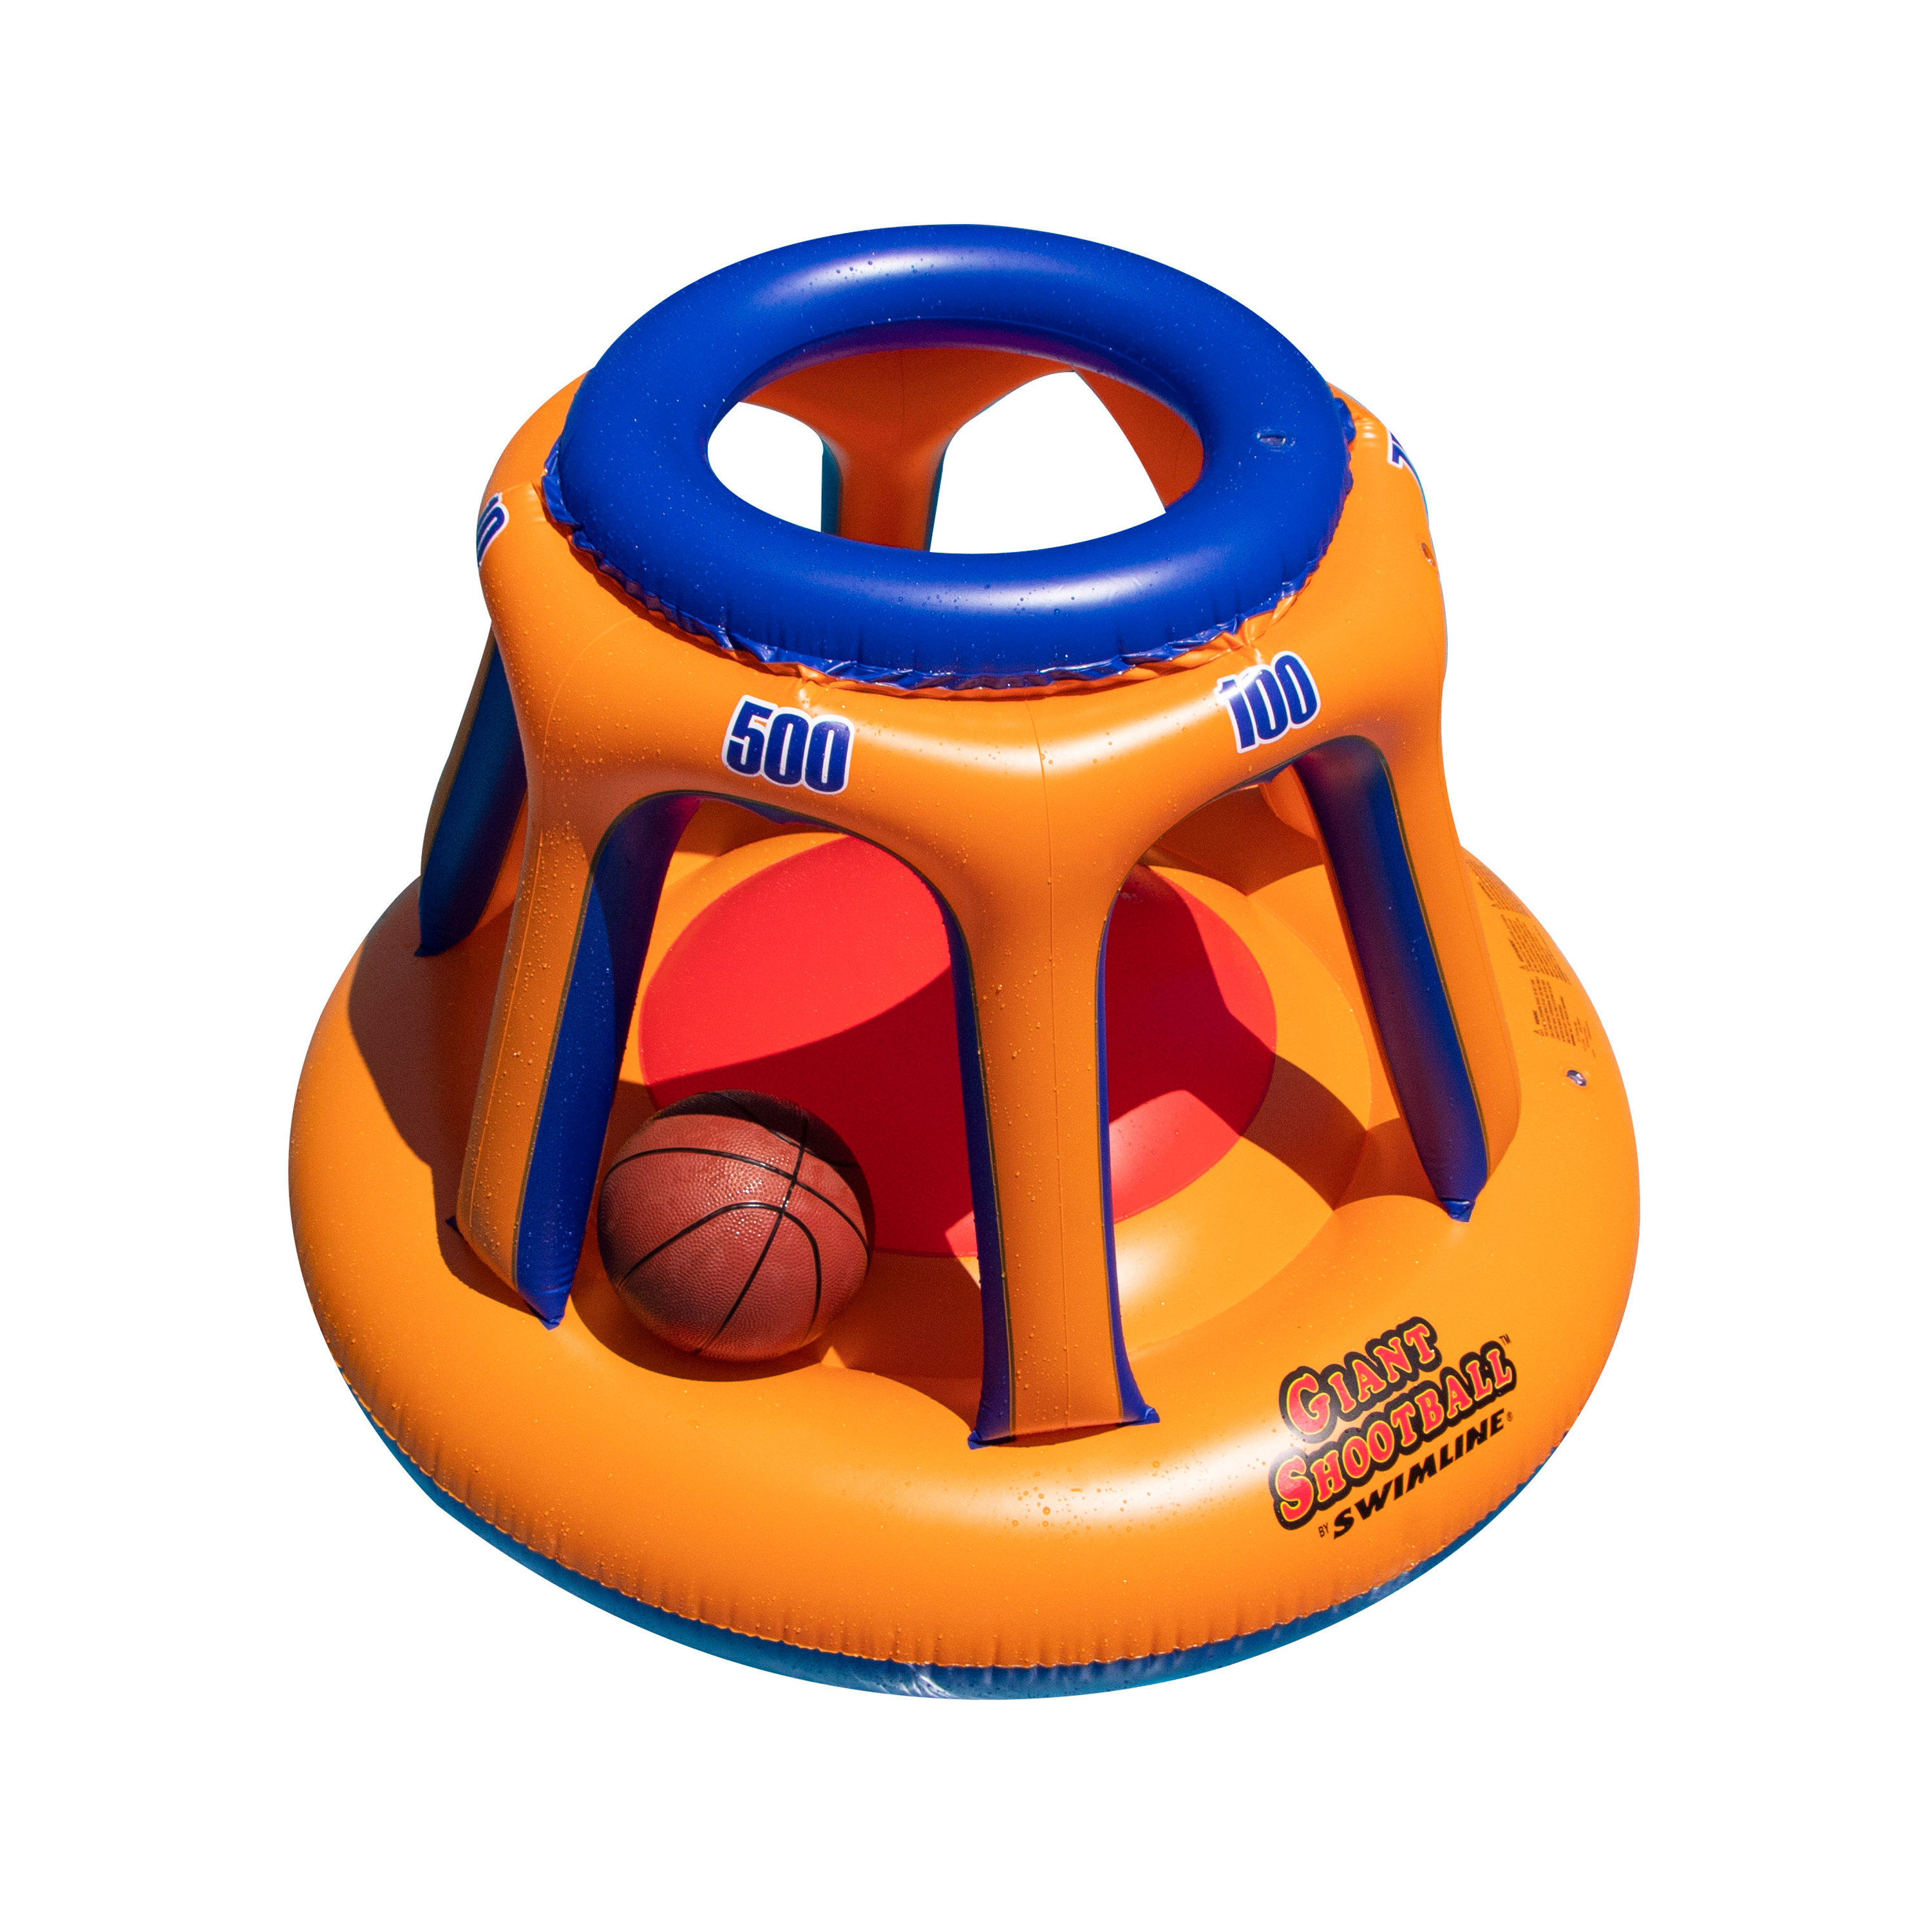 SWIMLINE Inflatable Pool Basketball Hoop Floating Or Poolside Game Giant Shootball Multiple Scoring Ports For Kids & Adults Swimming Splash Hoops With Water Basketball Pools Toy Outdoor Summer Hoops - image 1 of 5